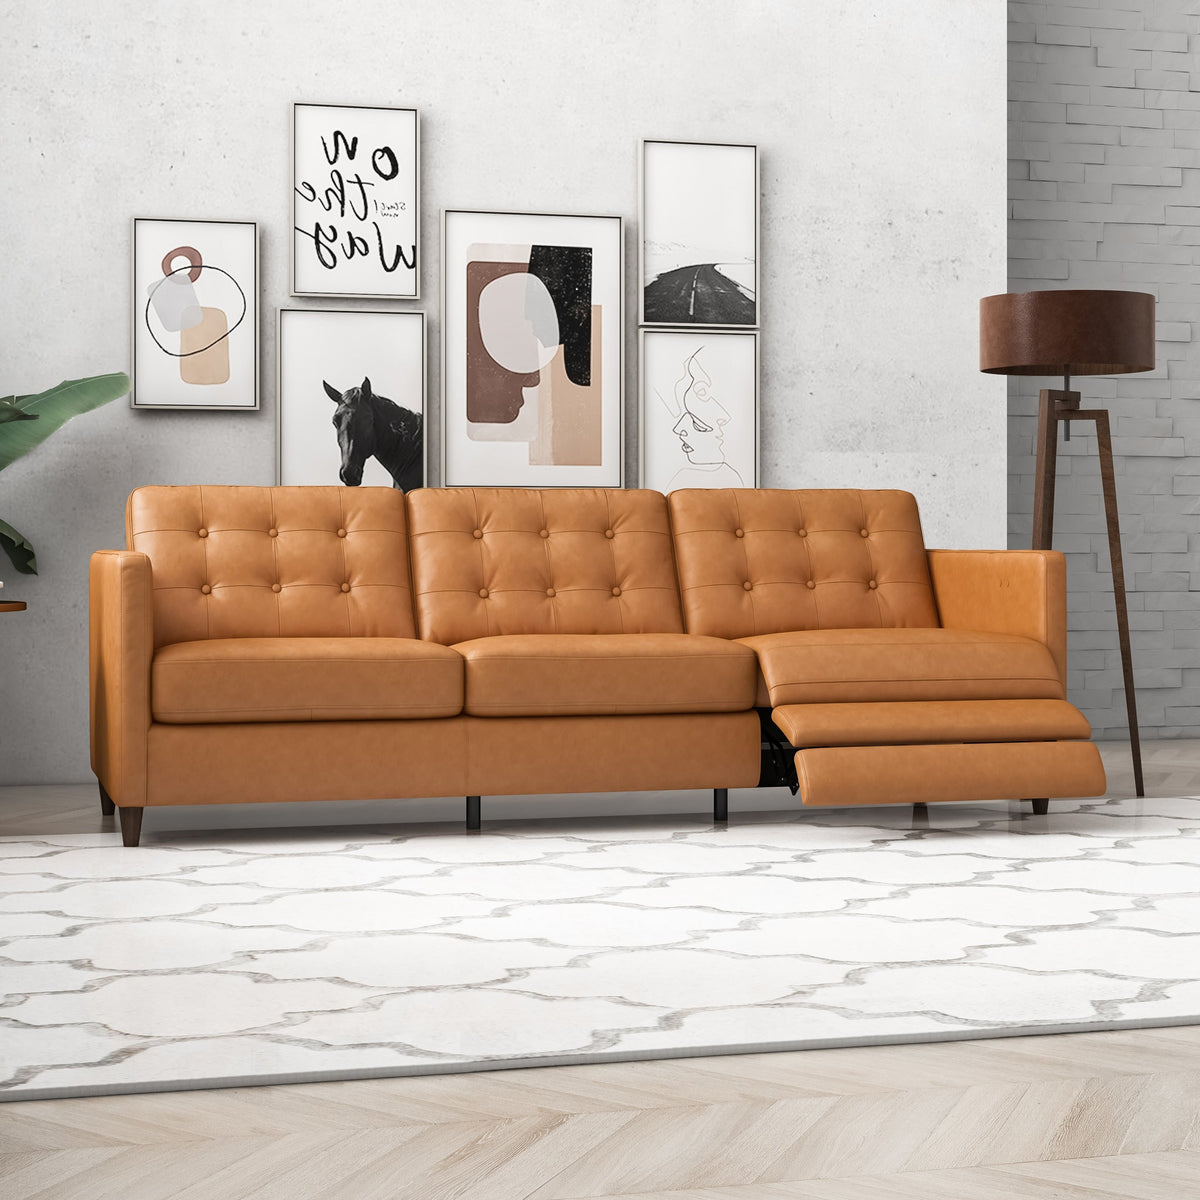 Louis Leather Electric Reclining Sofa -Tan right | MidinMod | TX | Best Furniture stores in Houston